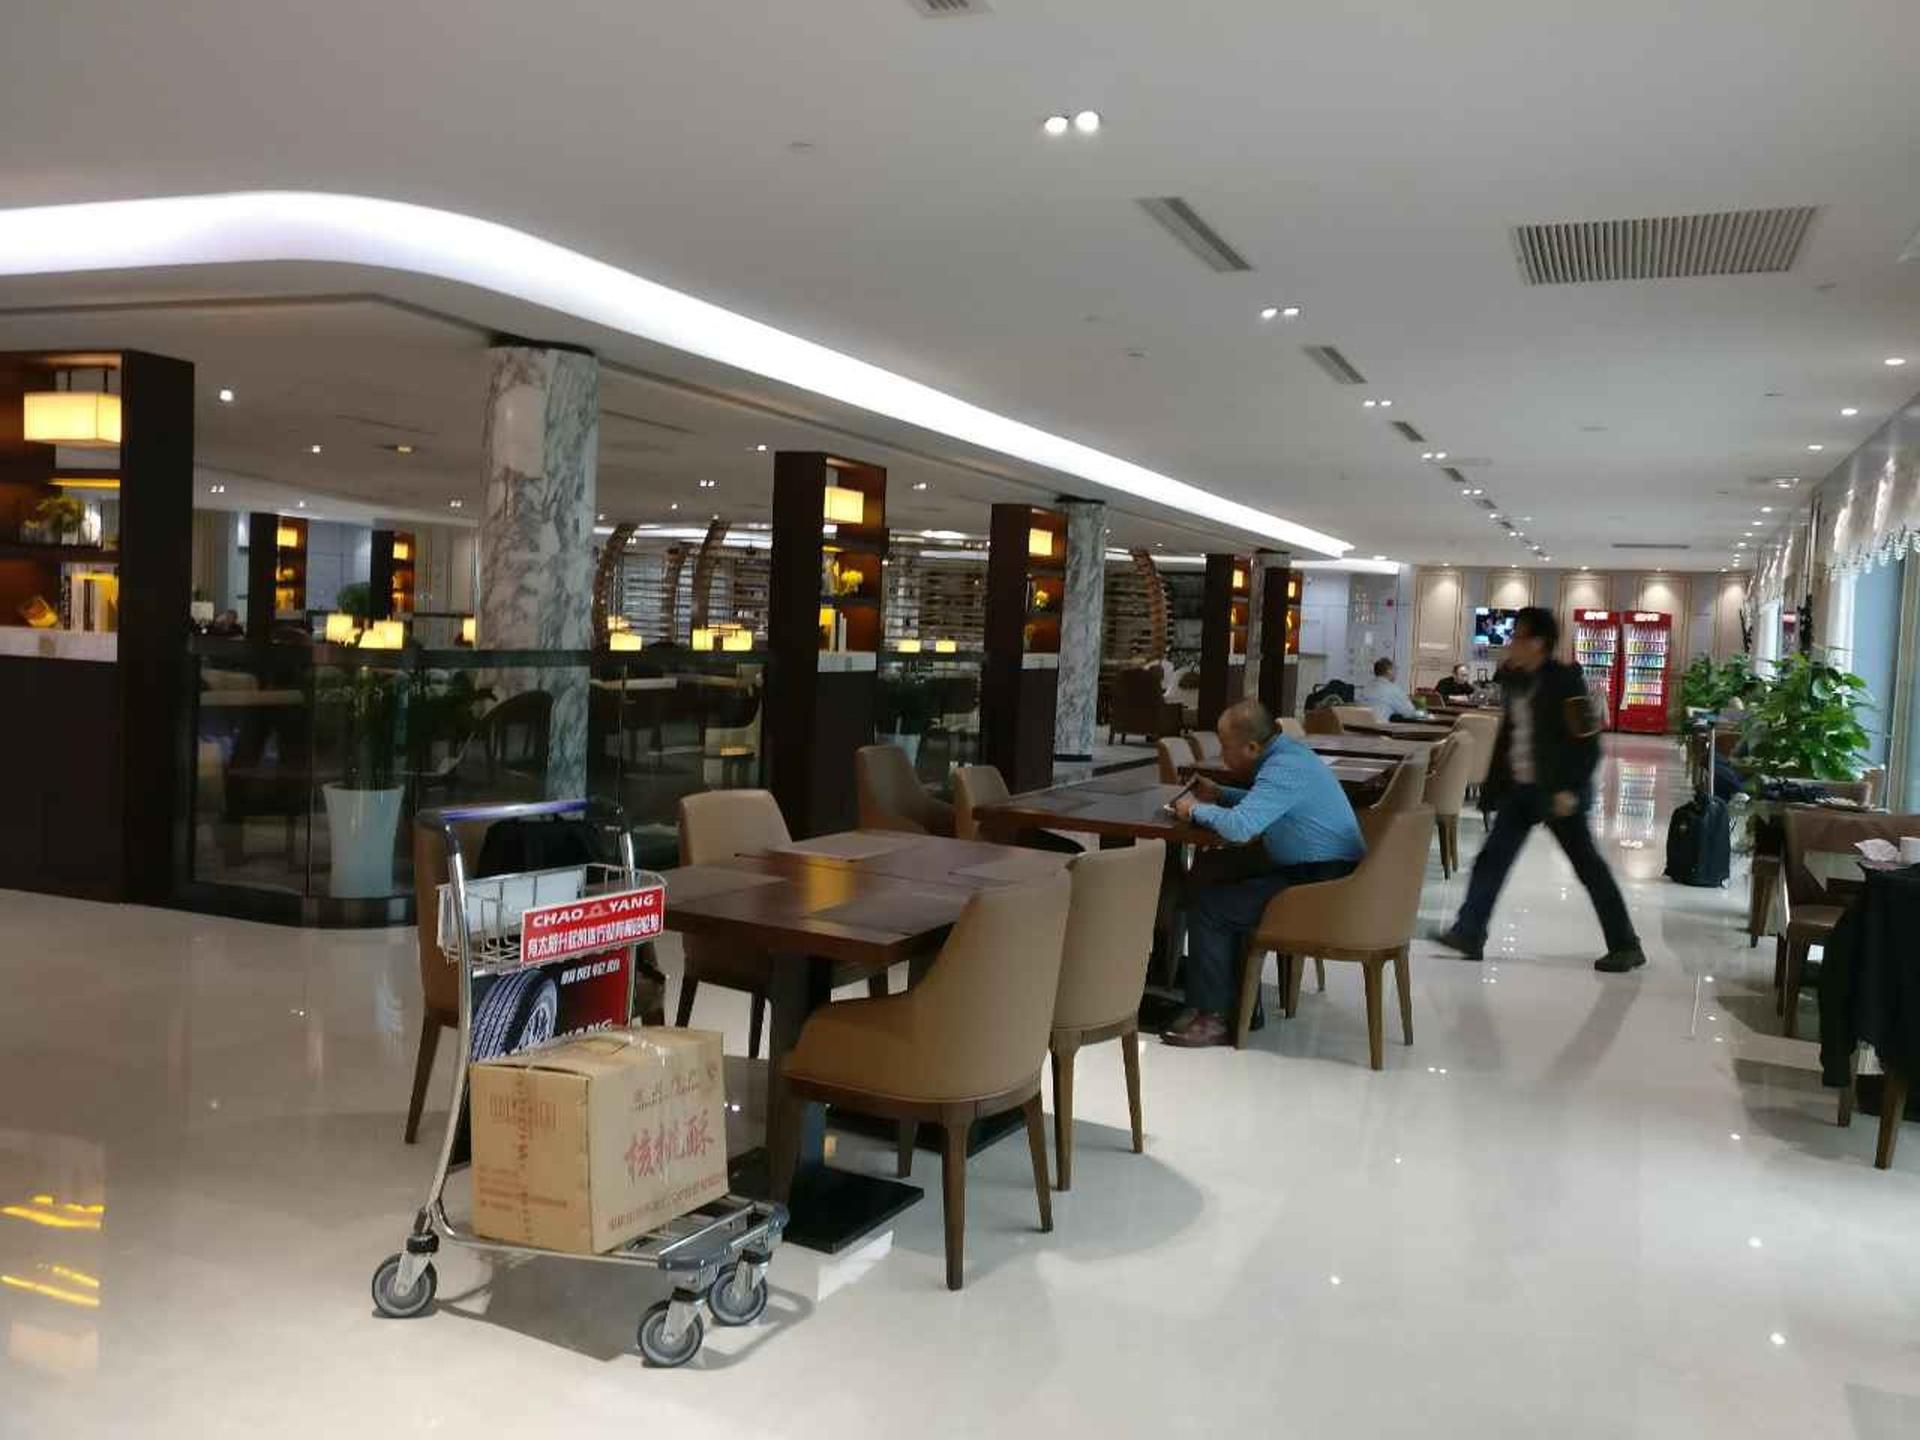 No. 1 First and Business Class Lounge image 7 of 7